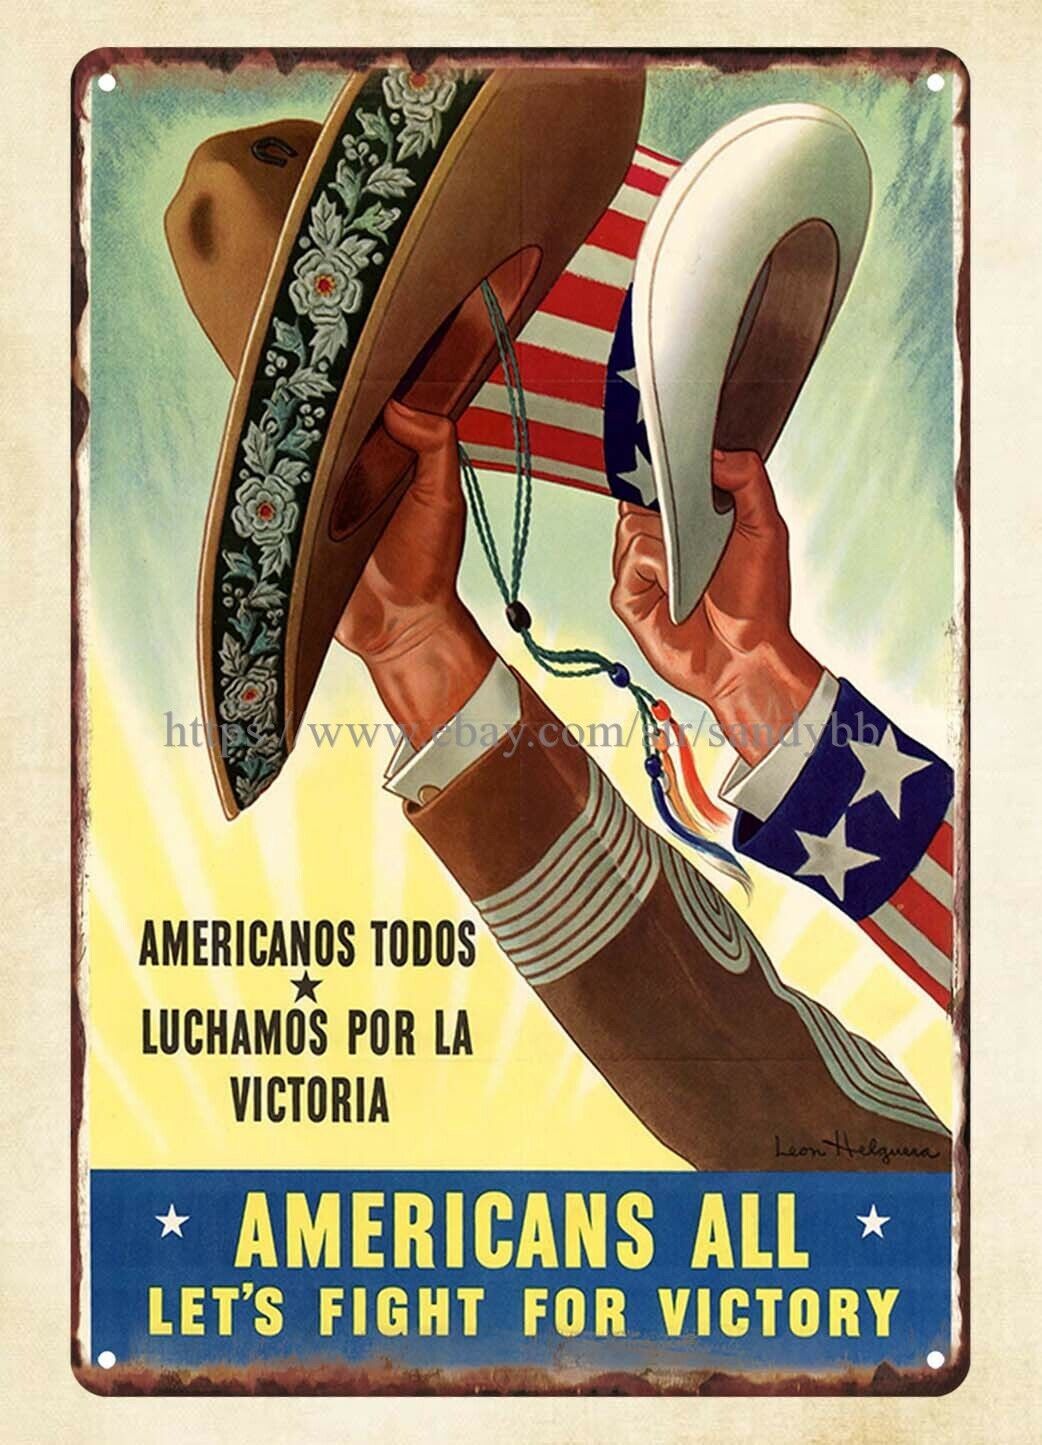 ww2 1943 Americans all, let's fight for victory Americanos todos victoria top